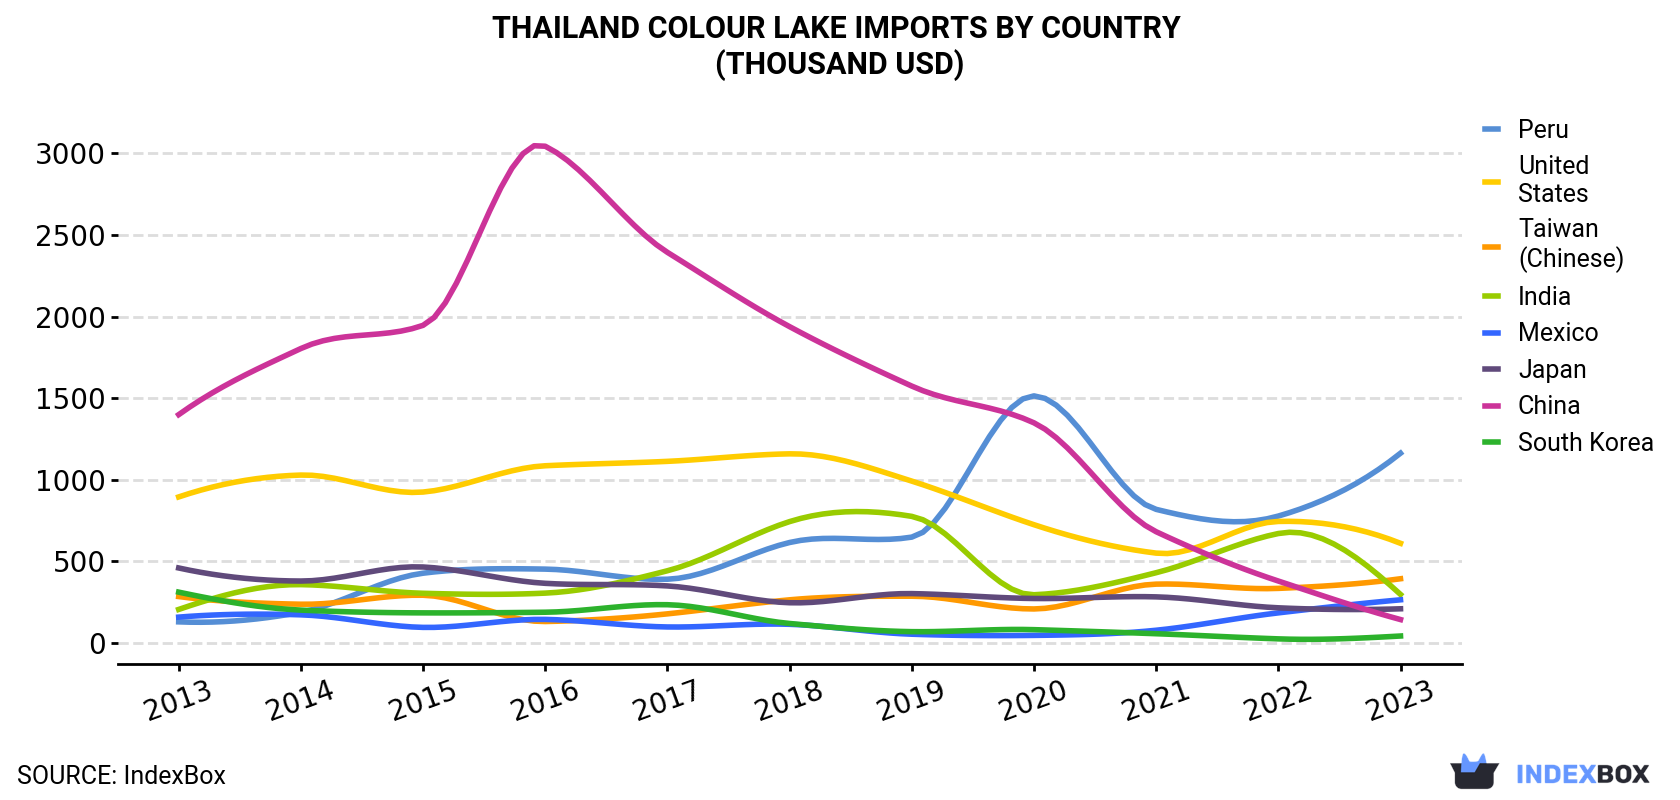 Thailand Colour Lake Imports By Country (Thousand USD)